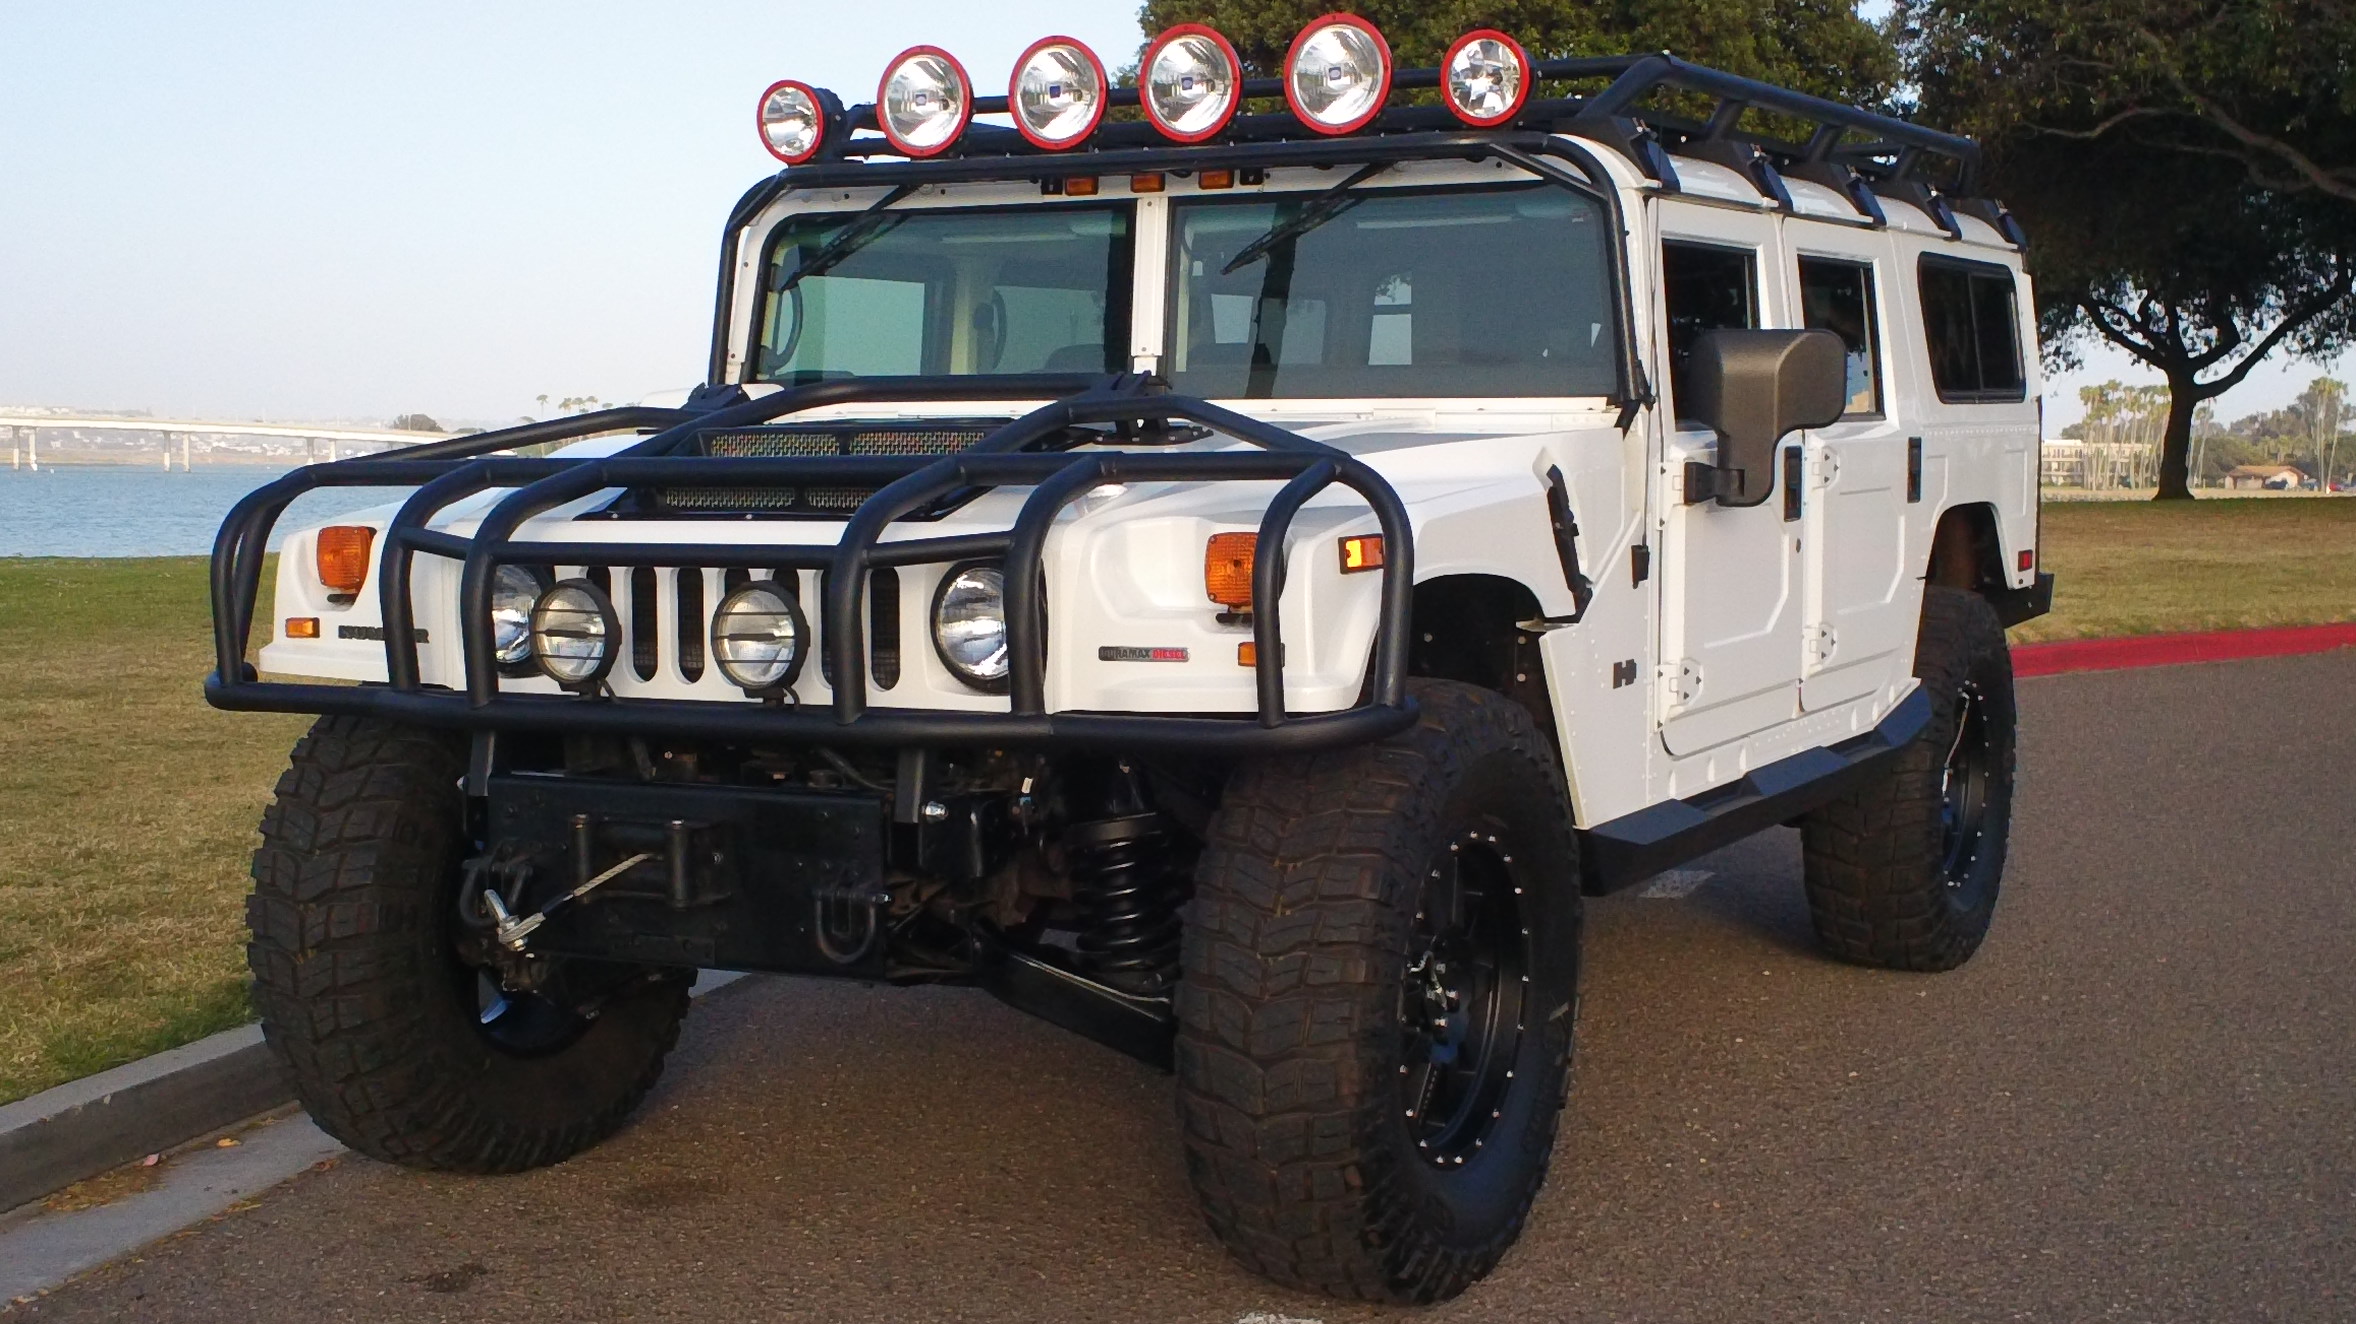 sold…..2006 hummer h1 search and rescue alpha wagon duramax 2nd generation all black interior rare